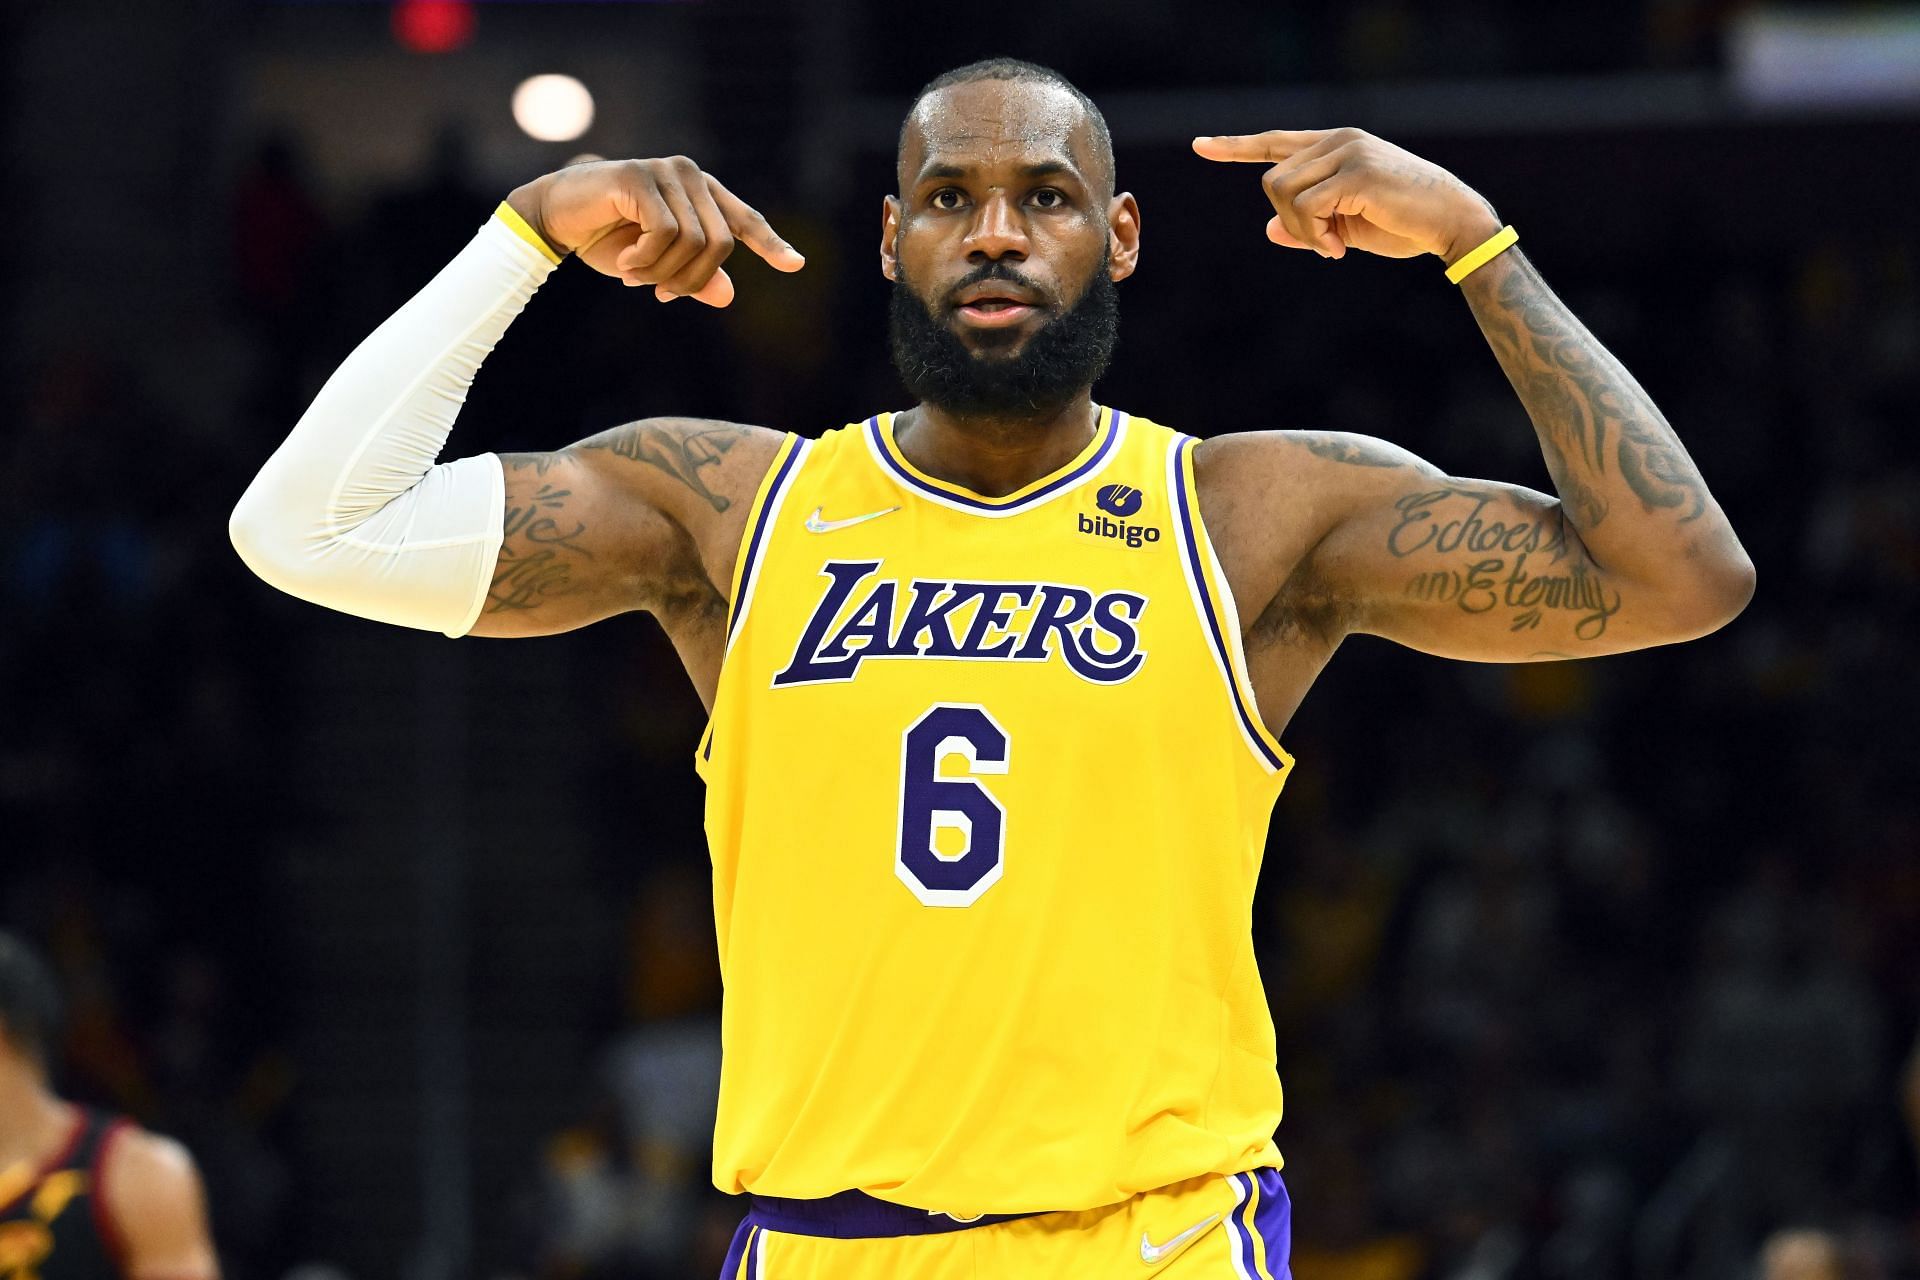 LeBron James during the Los Angeles Lakers v Cleveland Cavaliers regular season game